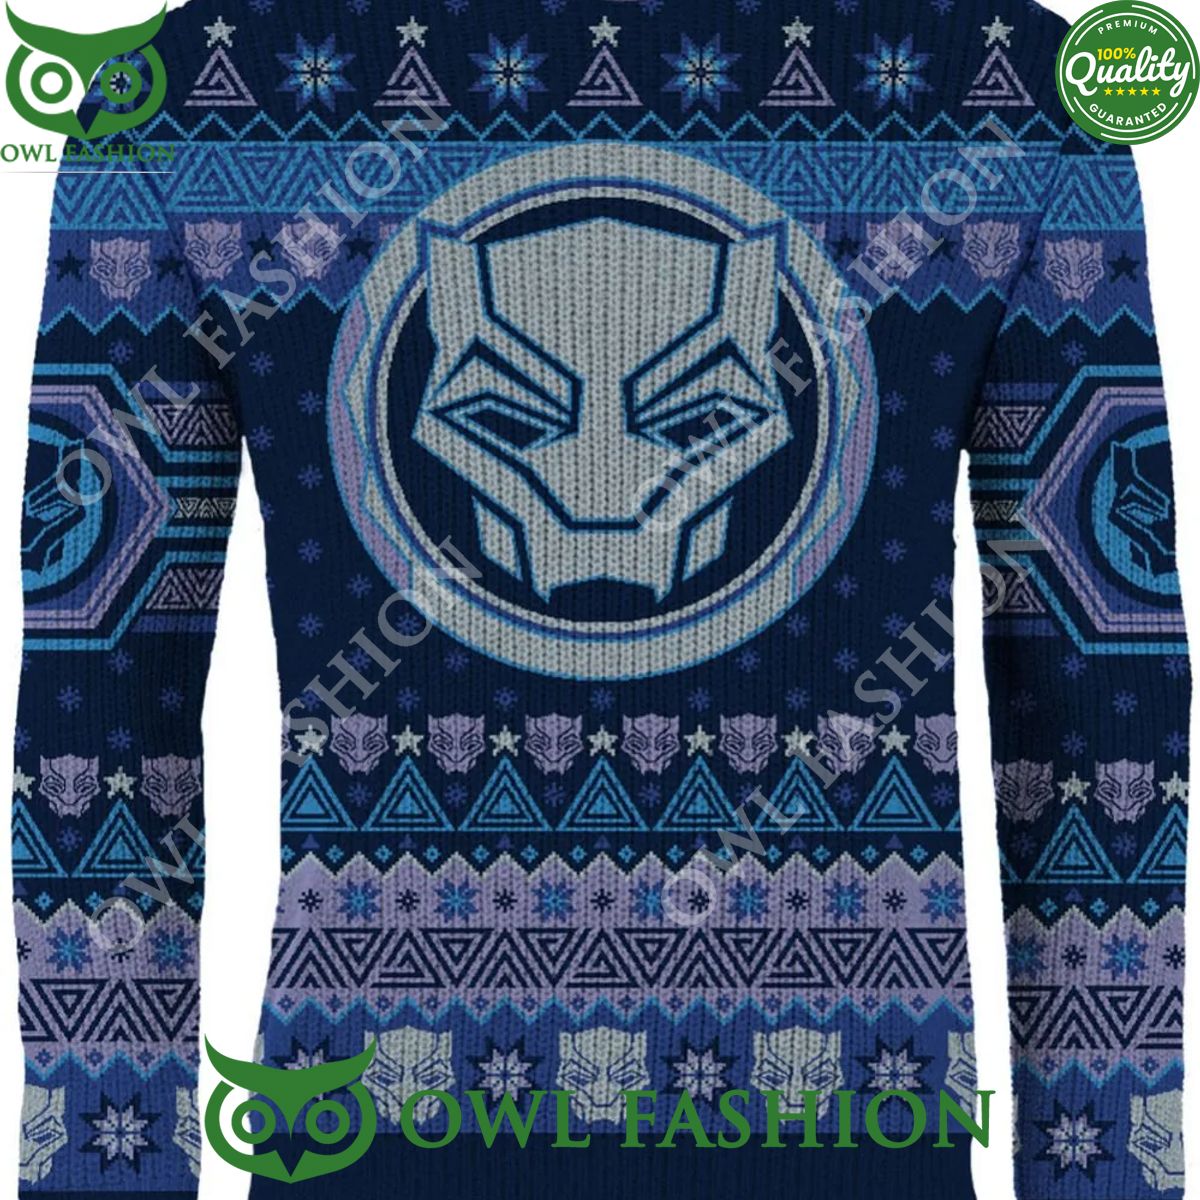 Black Panther Christmas Forever Christmas Jumper